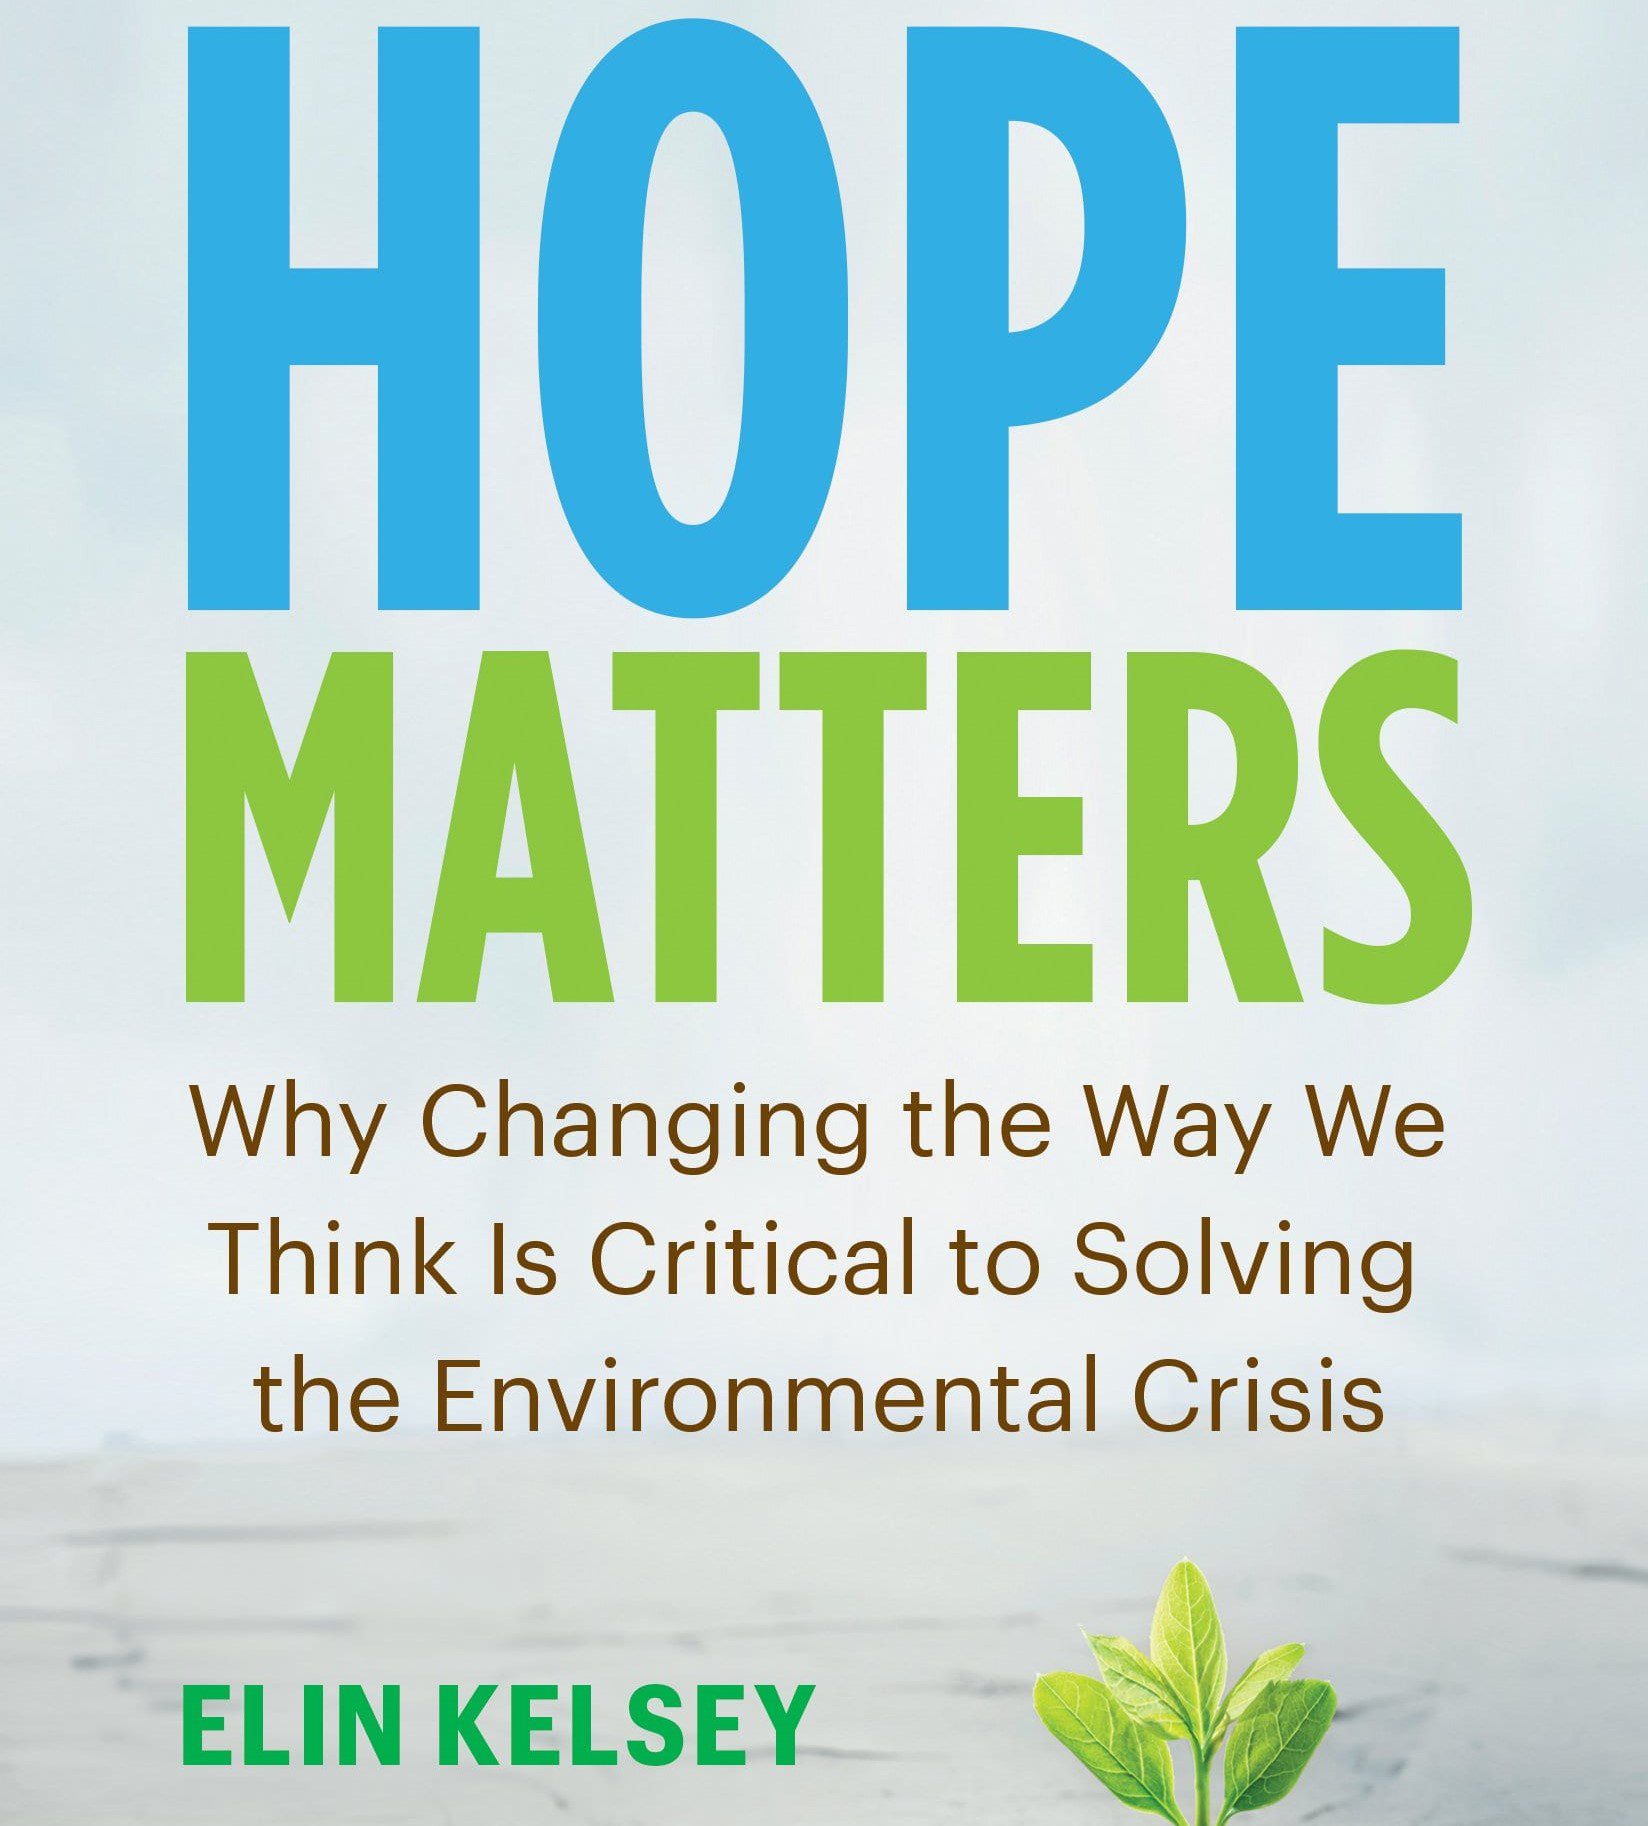 Book cover for Hope Matters: Why Changing the Way We Think is Critical to Solving the Environmental Crisis, by Elin Kelsey.